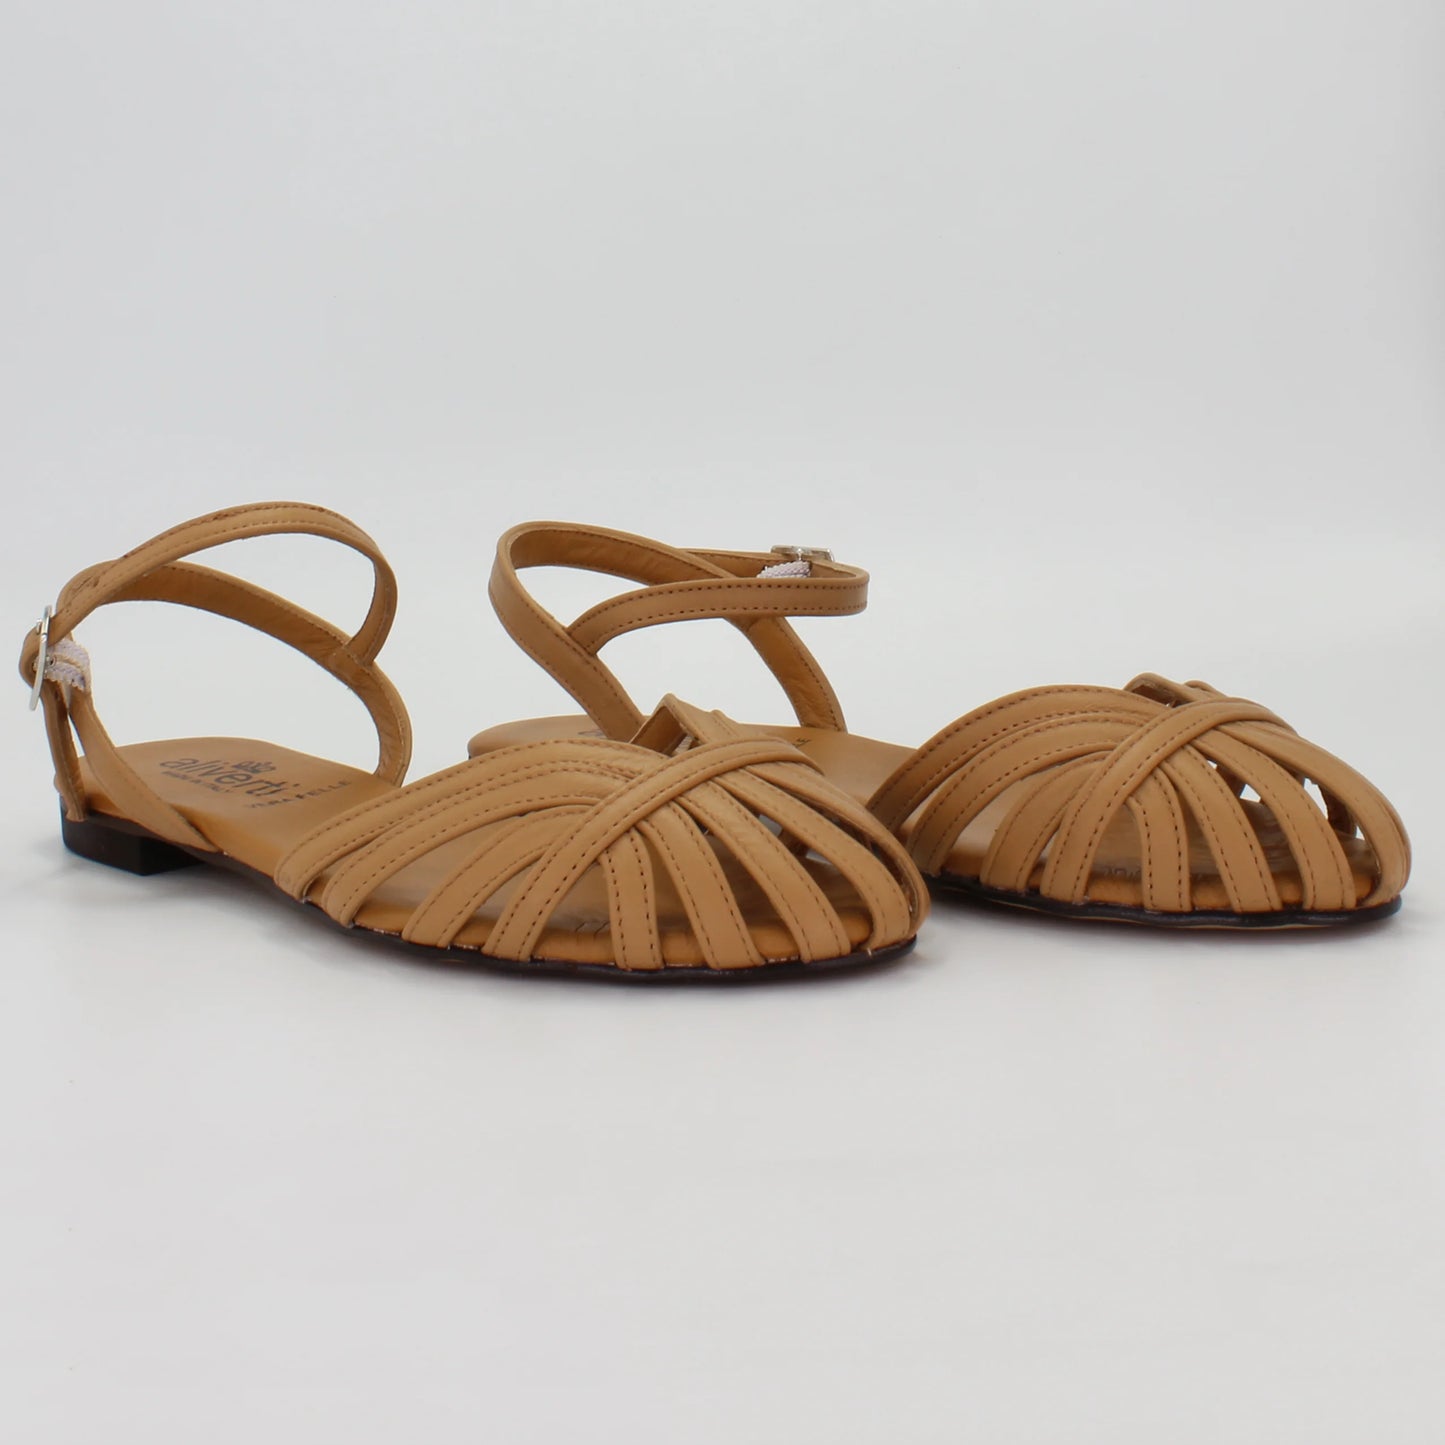 Shop Handmade Italian Leather sandal in cuoio (G500) or browse our range of hand-made Italian shoes in leather or suede in-store at Aliverti Cape Town, or shop online. We deliver in South Africa & offer multiple payment plans as well as accept multiple safe & secure payment methods.